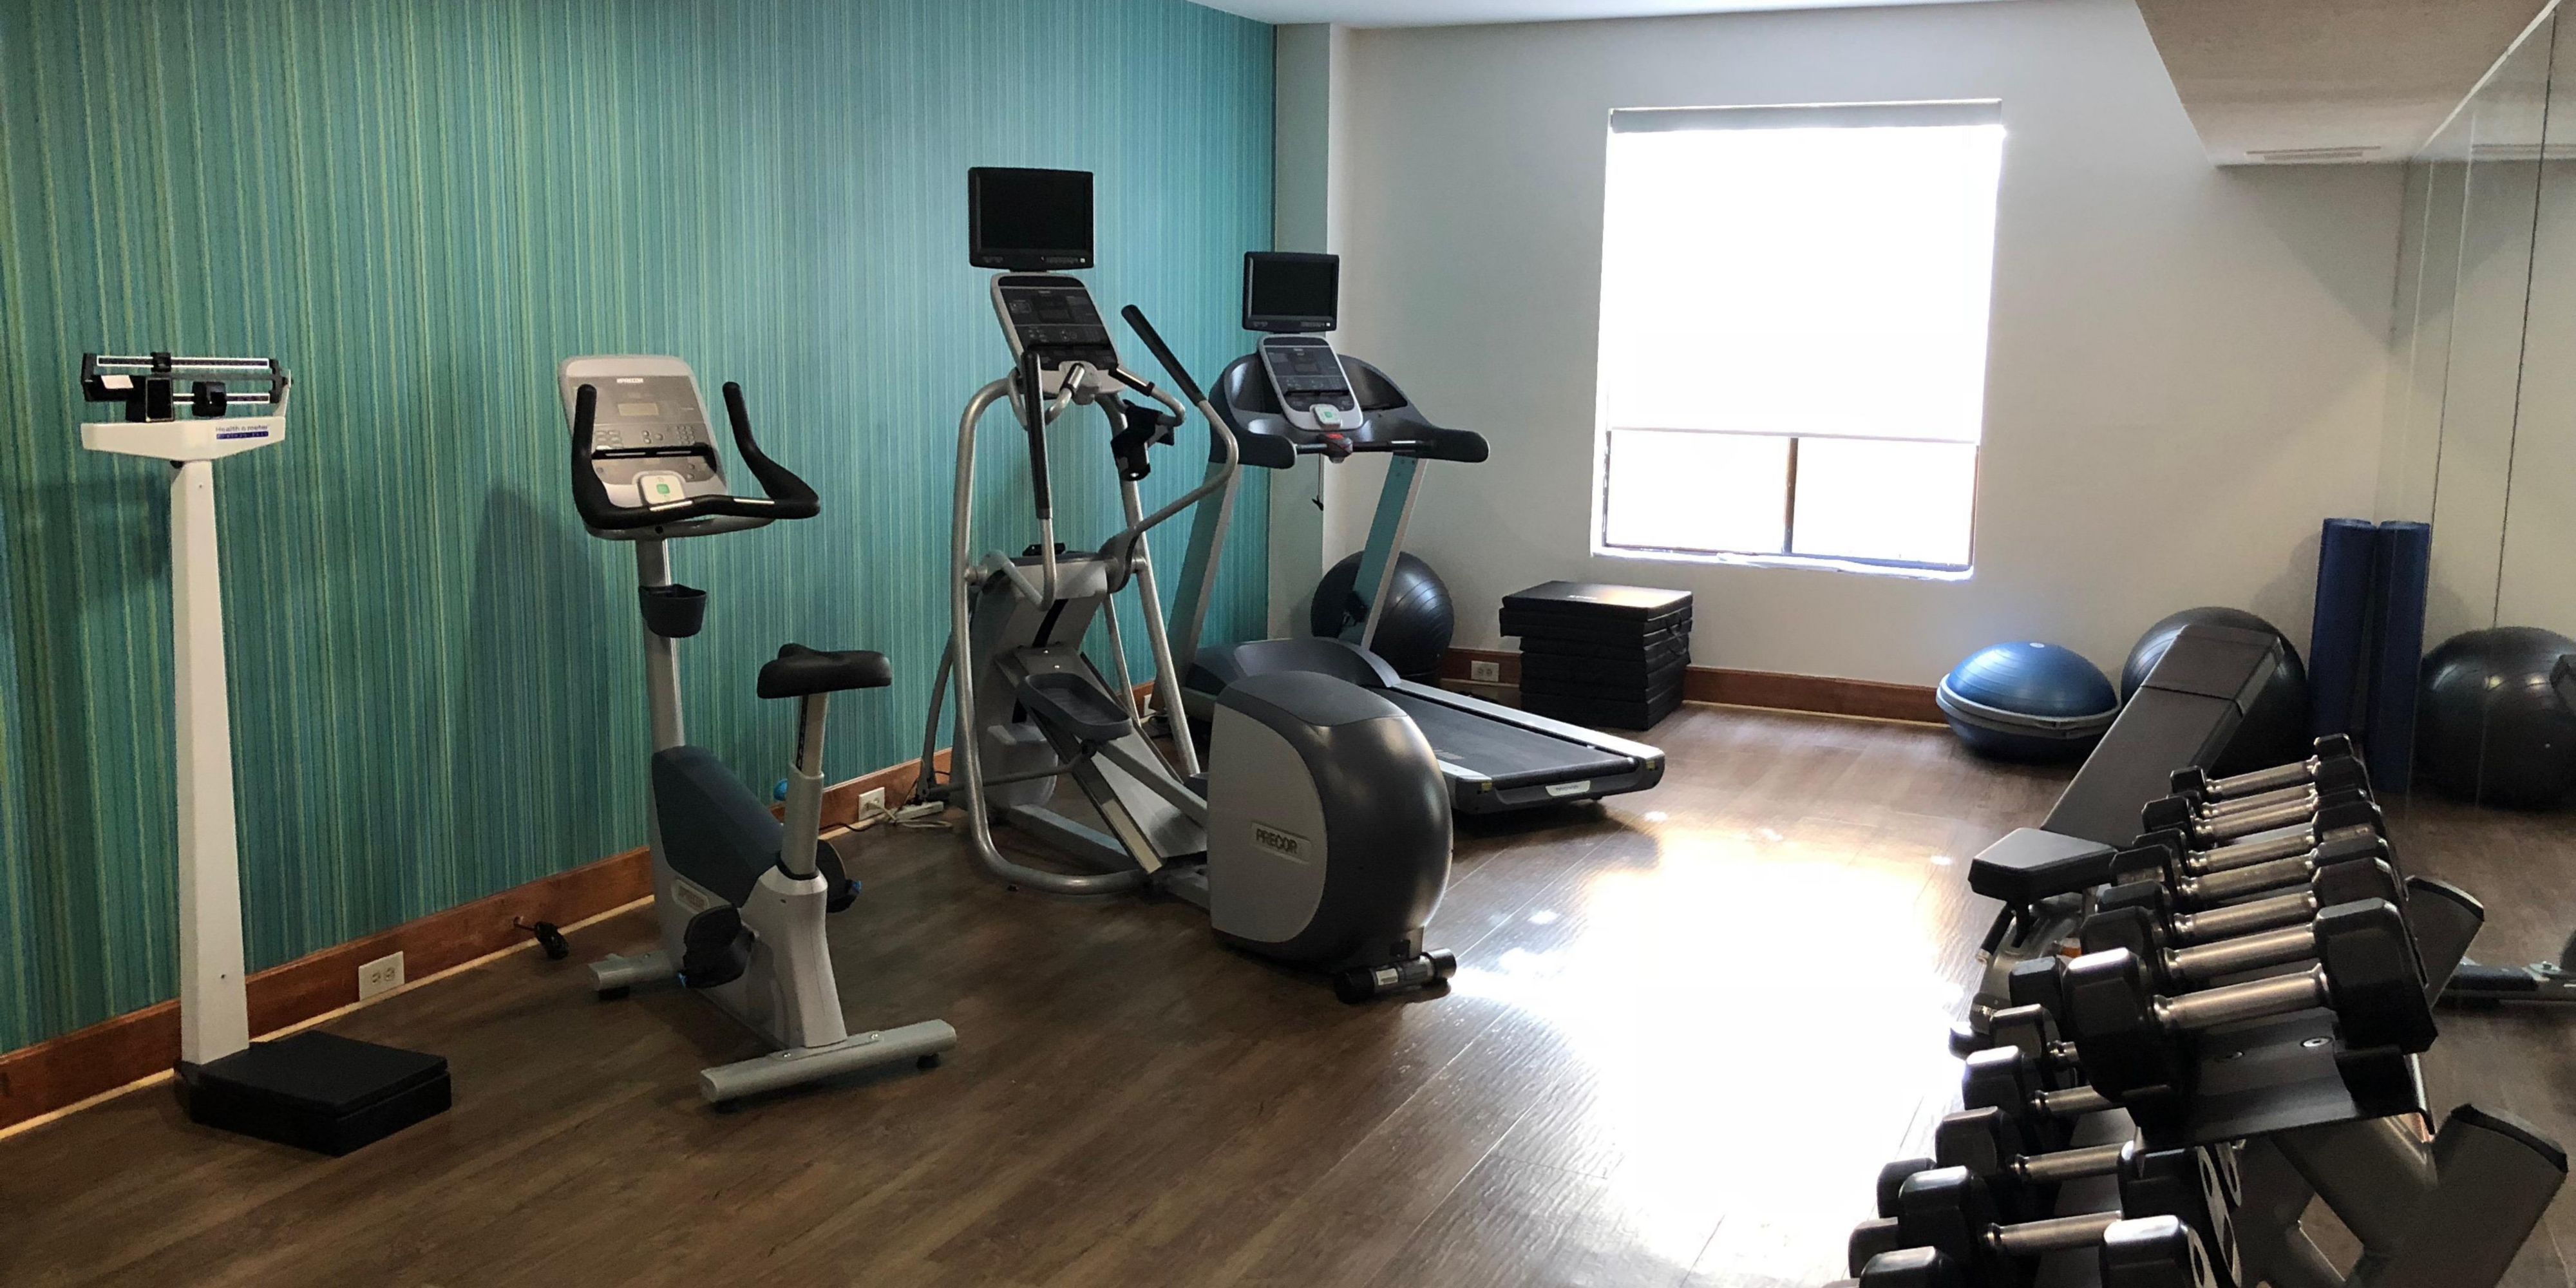 Our newly renovated hotel includes our updated Fitness Center.  We have Elliptical Machine, Free Weights, Treadmill and a Stationary Bike all available for your use why staying with us.  No need to leave the hotel to get your workout in!